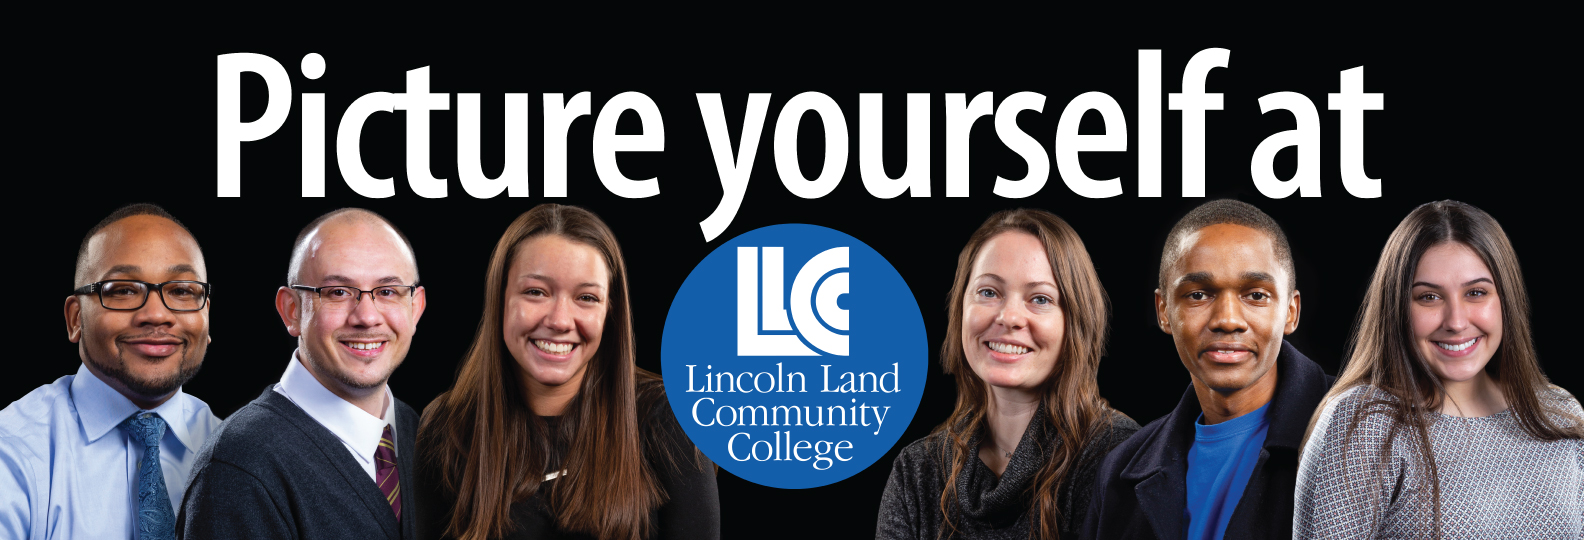 Picture yourself at LLCC Lincoln Land Community College